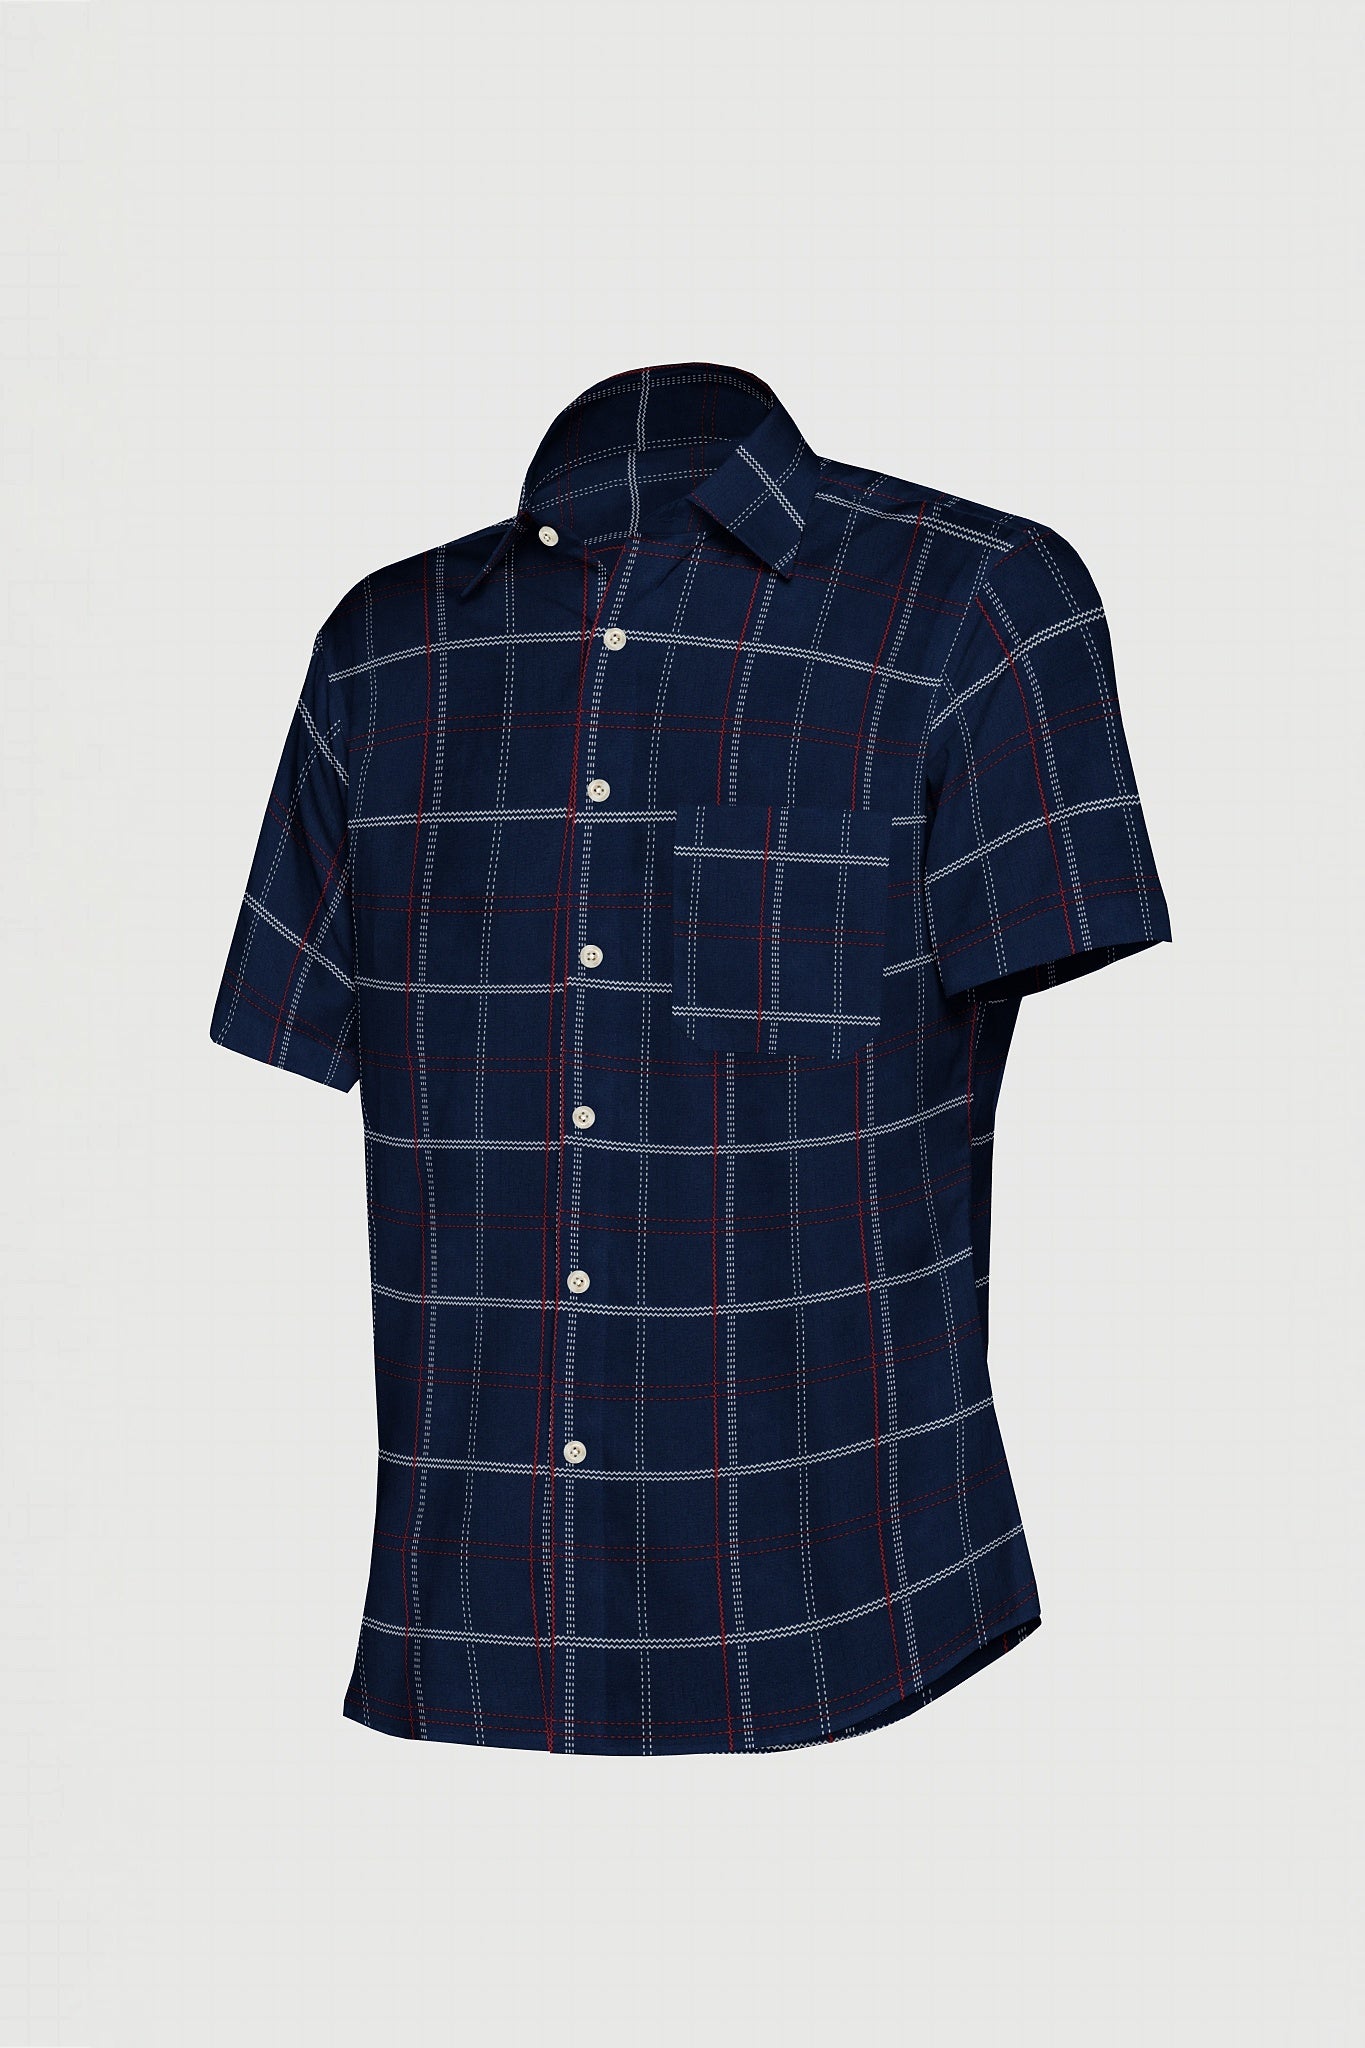 Denim Blue with Navy and Chili Red Altered Broken Checks Men's Cotton Shirt